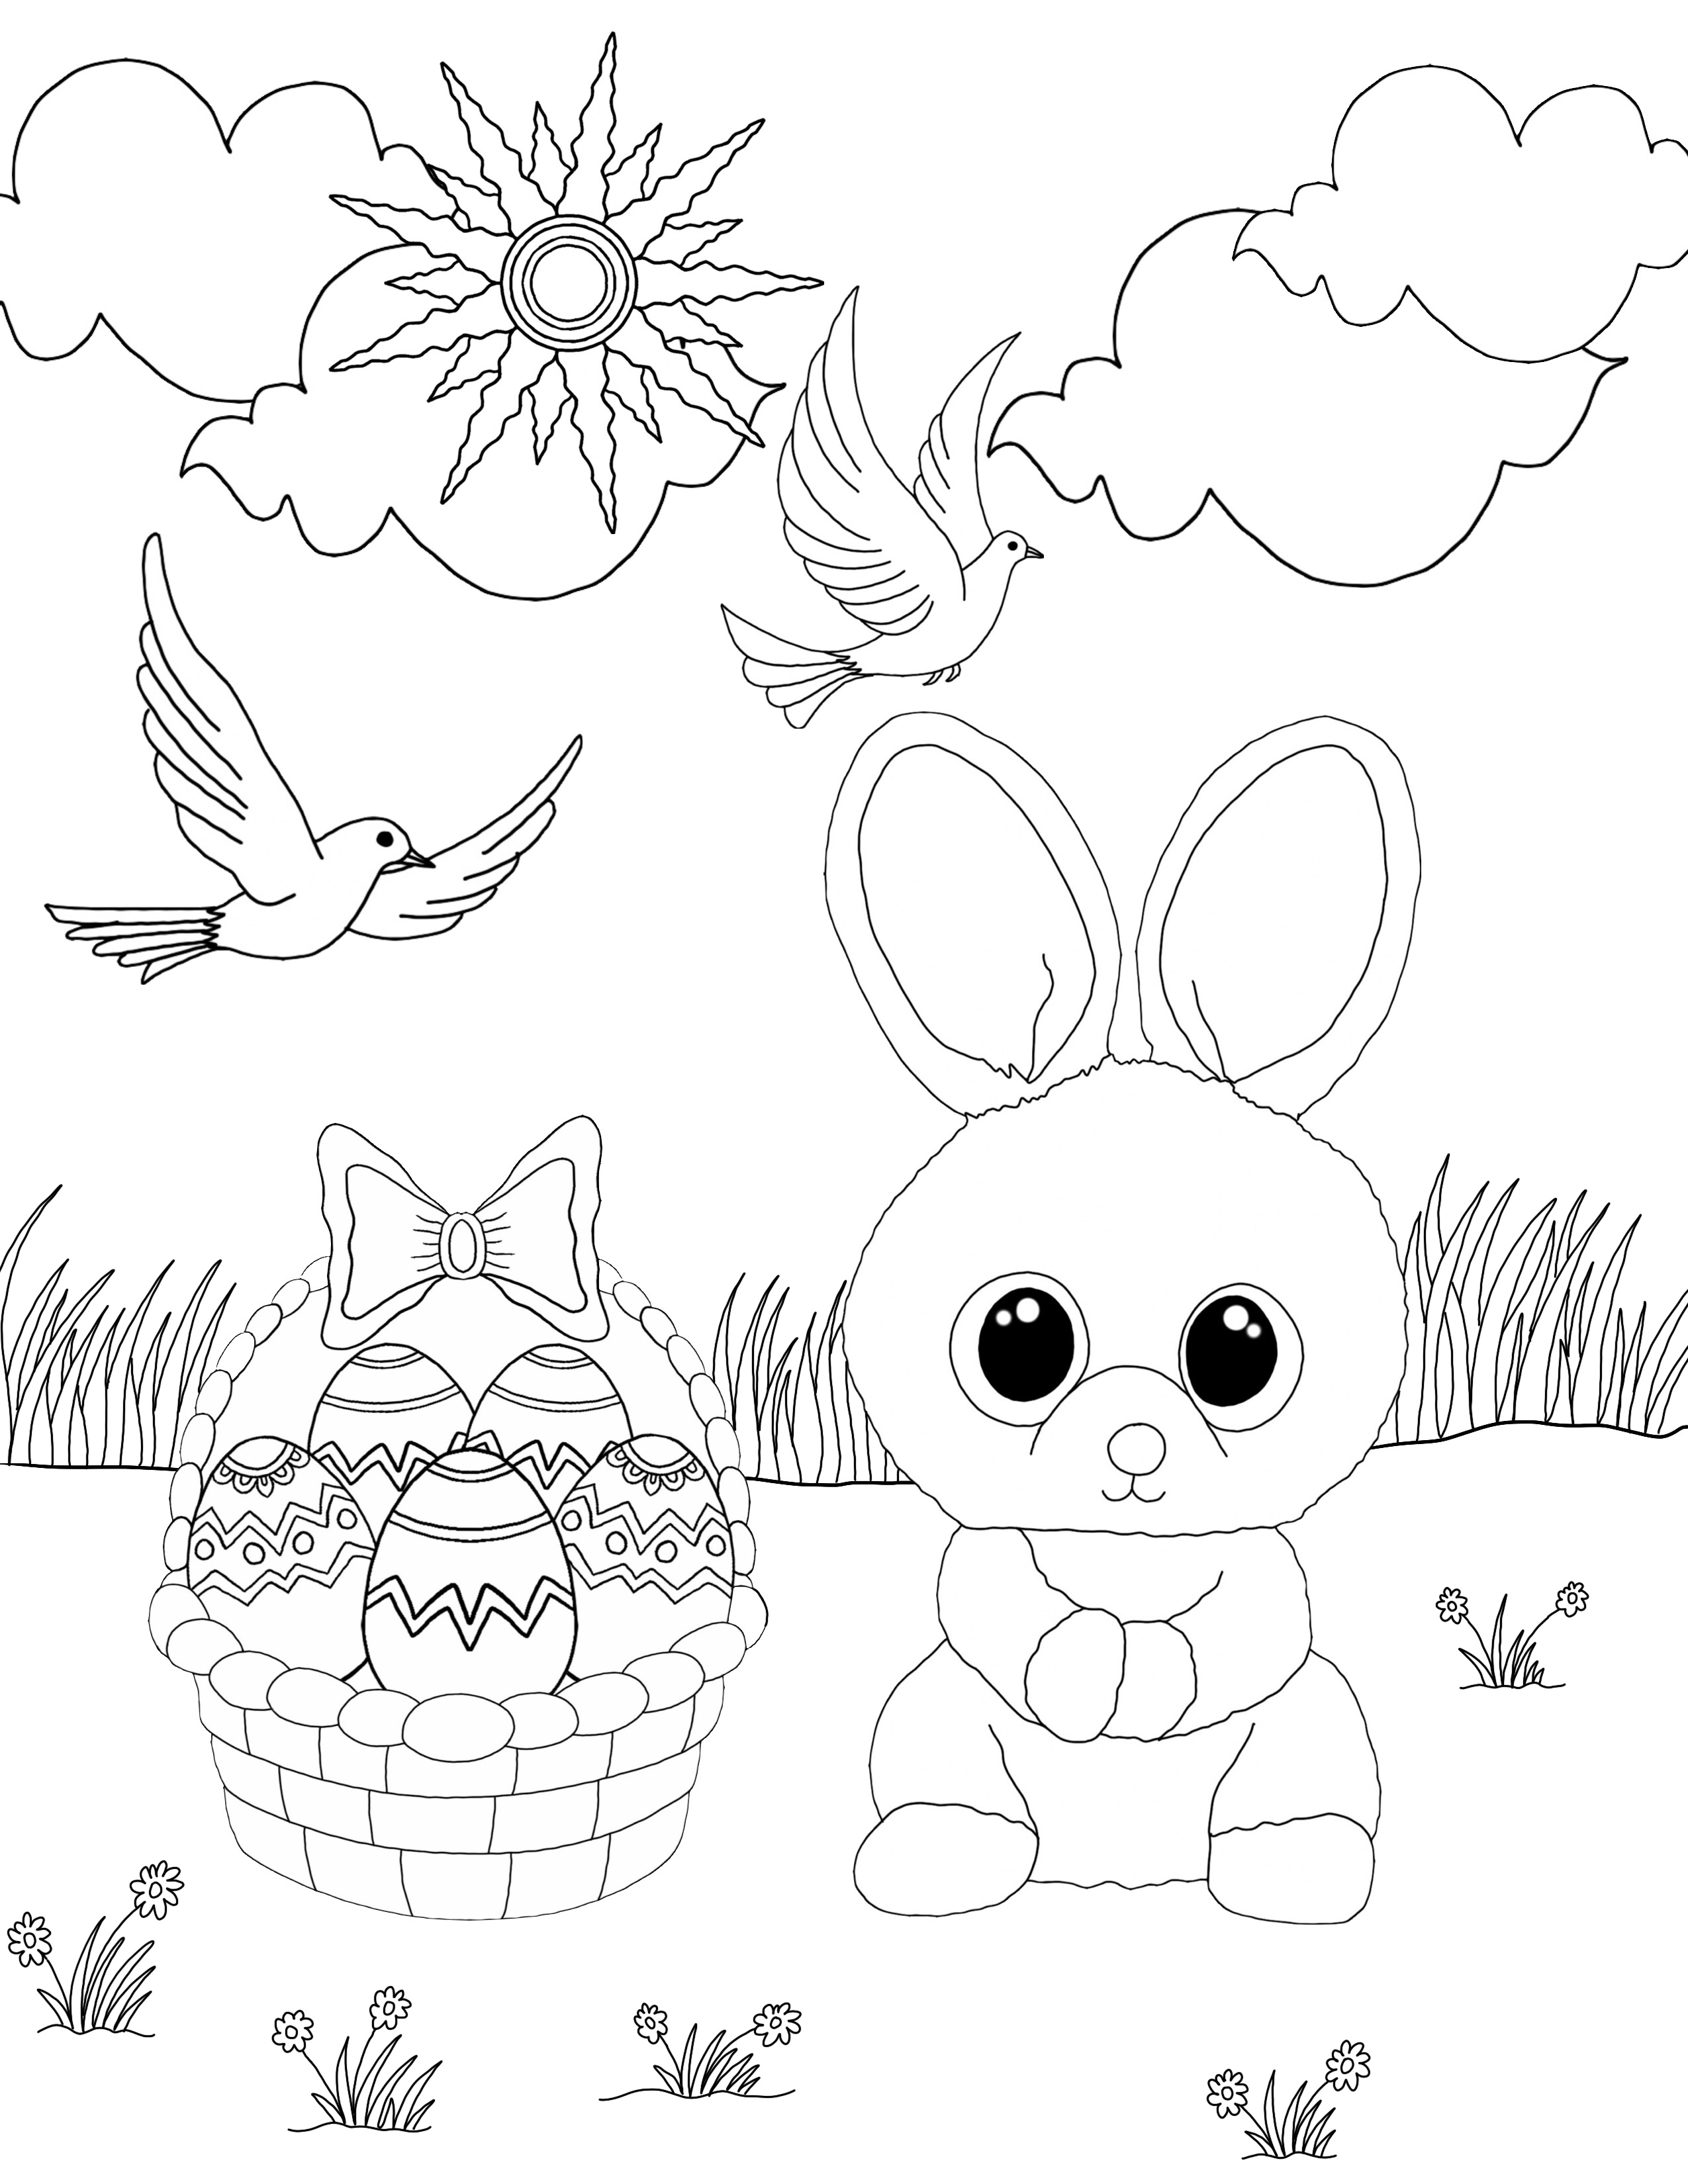 Beanie Boo Coloring Pages - Coloring Home